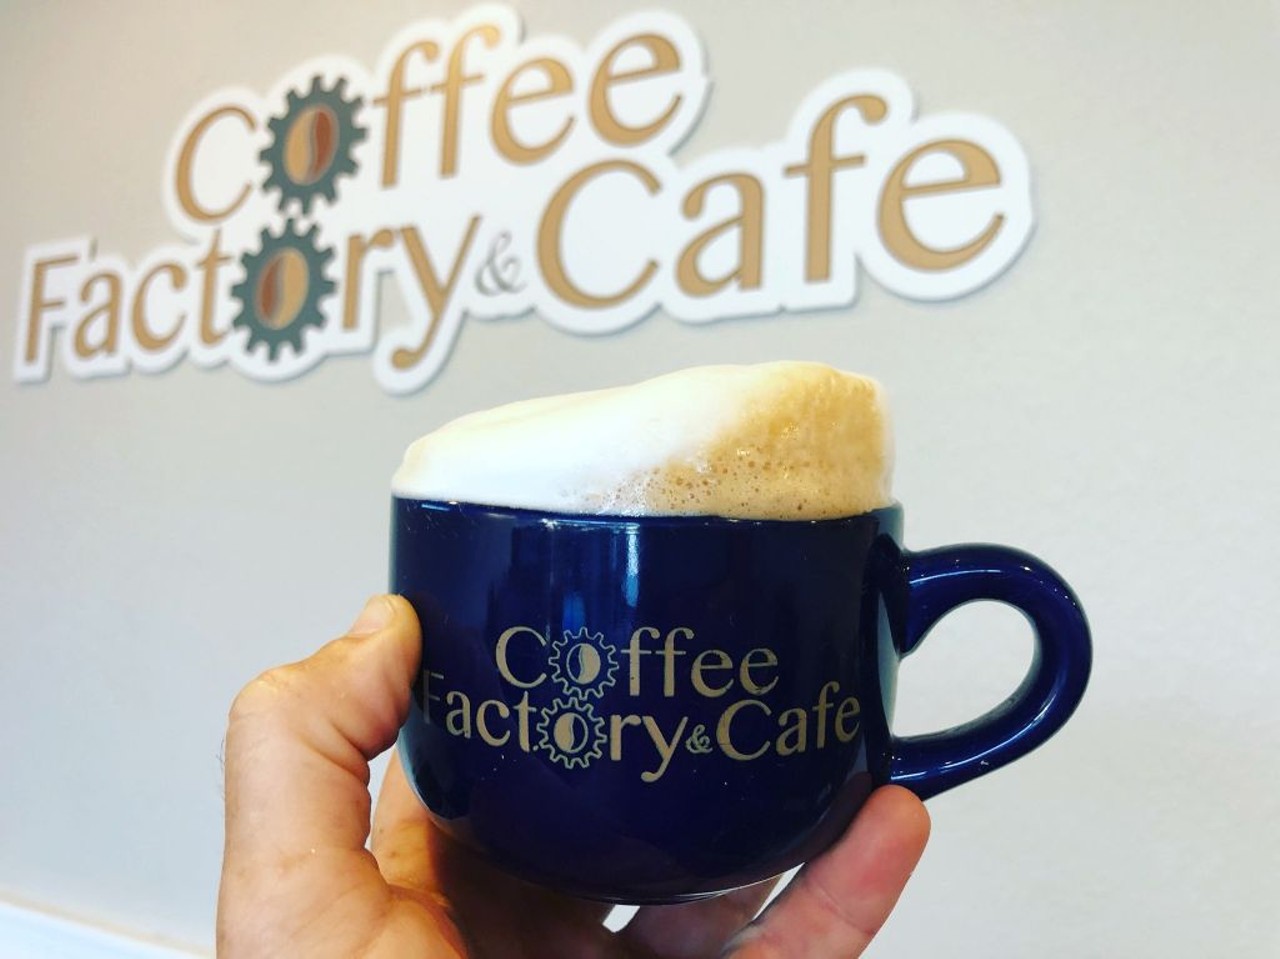 Coffee Factory & Cafe 
,12789 Waterford Lakes Pkwy #1 Orlando, FL 32828, (407) 277-2220
Coffee Factory is a great place to drink some coffee, have delicious food and sit outdoors with your pet while enjoying their free Wi-Fi. They have yummy breakfast items that are available all day.
Photo via Coffee Factory & Cafe/Facebook